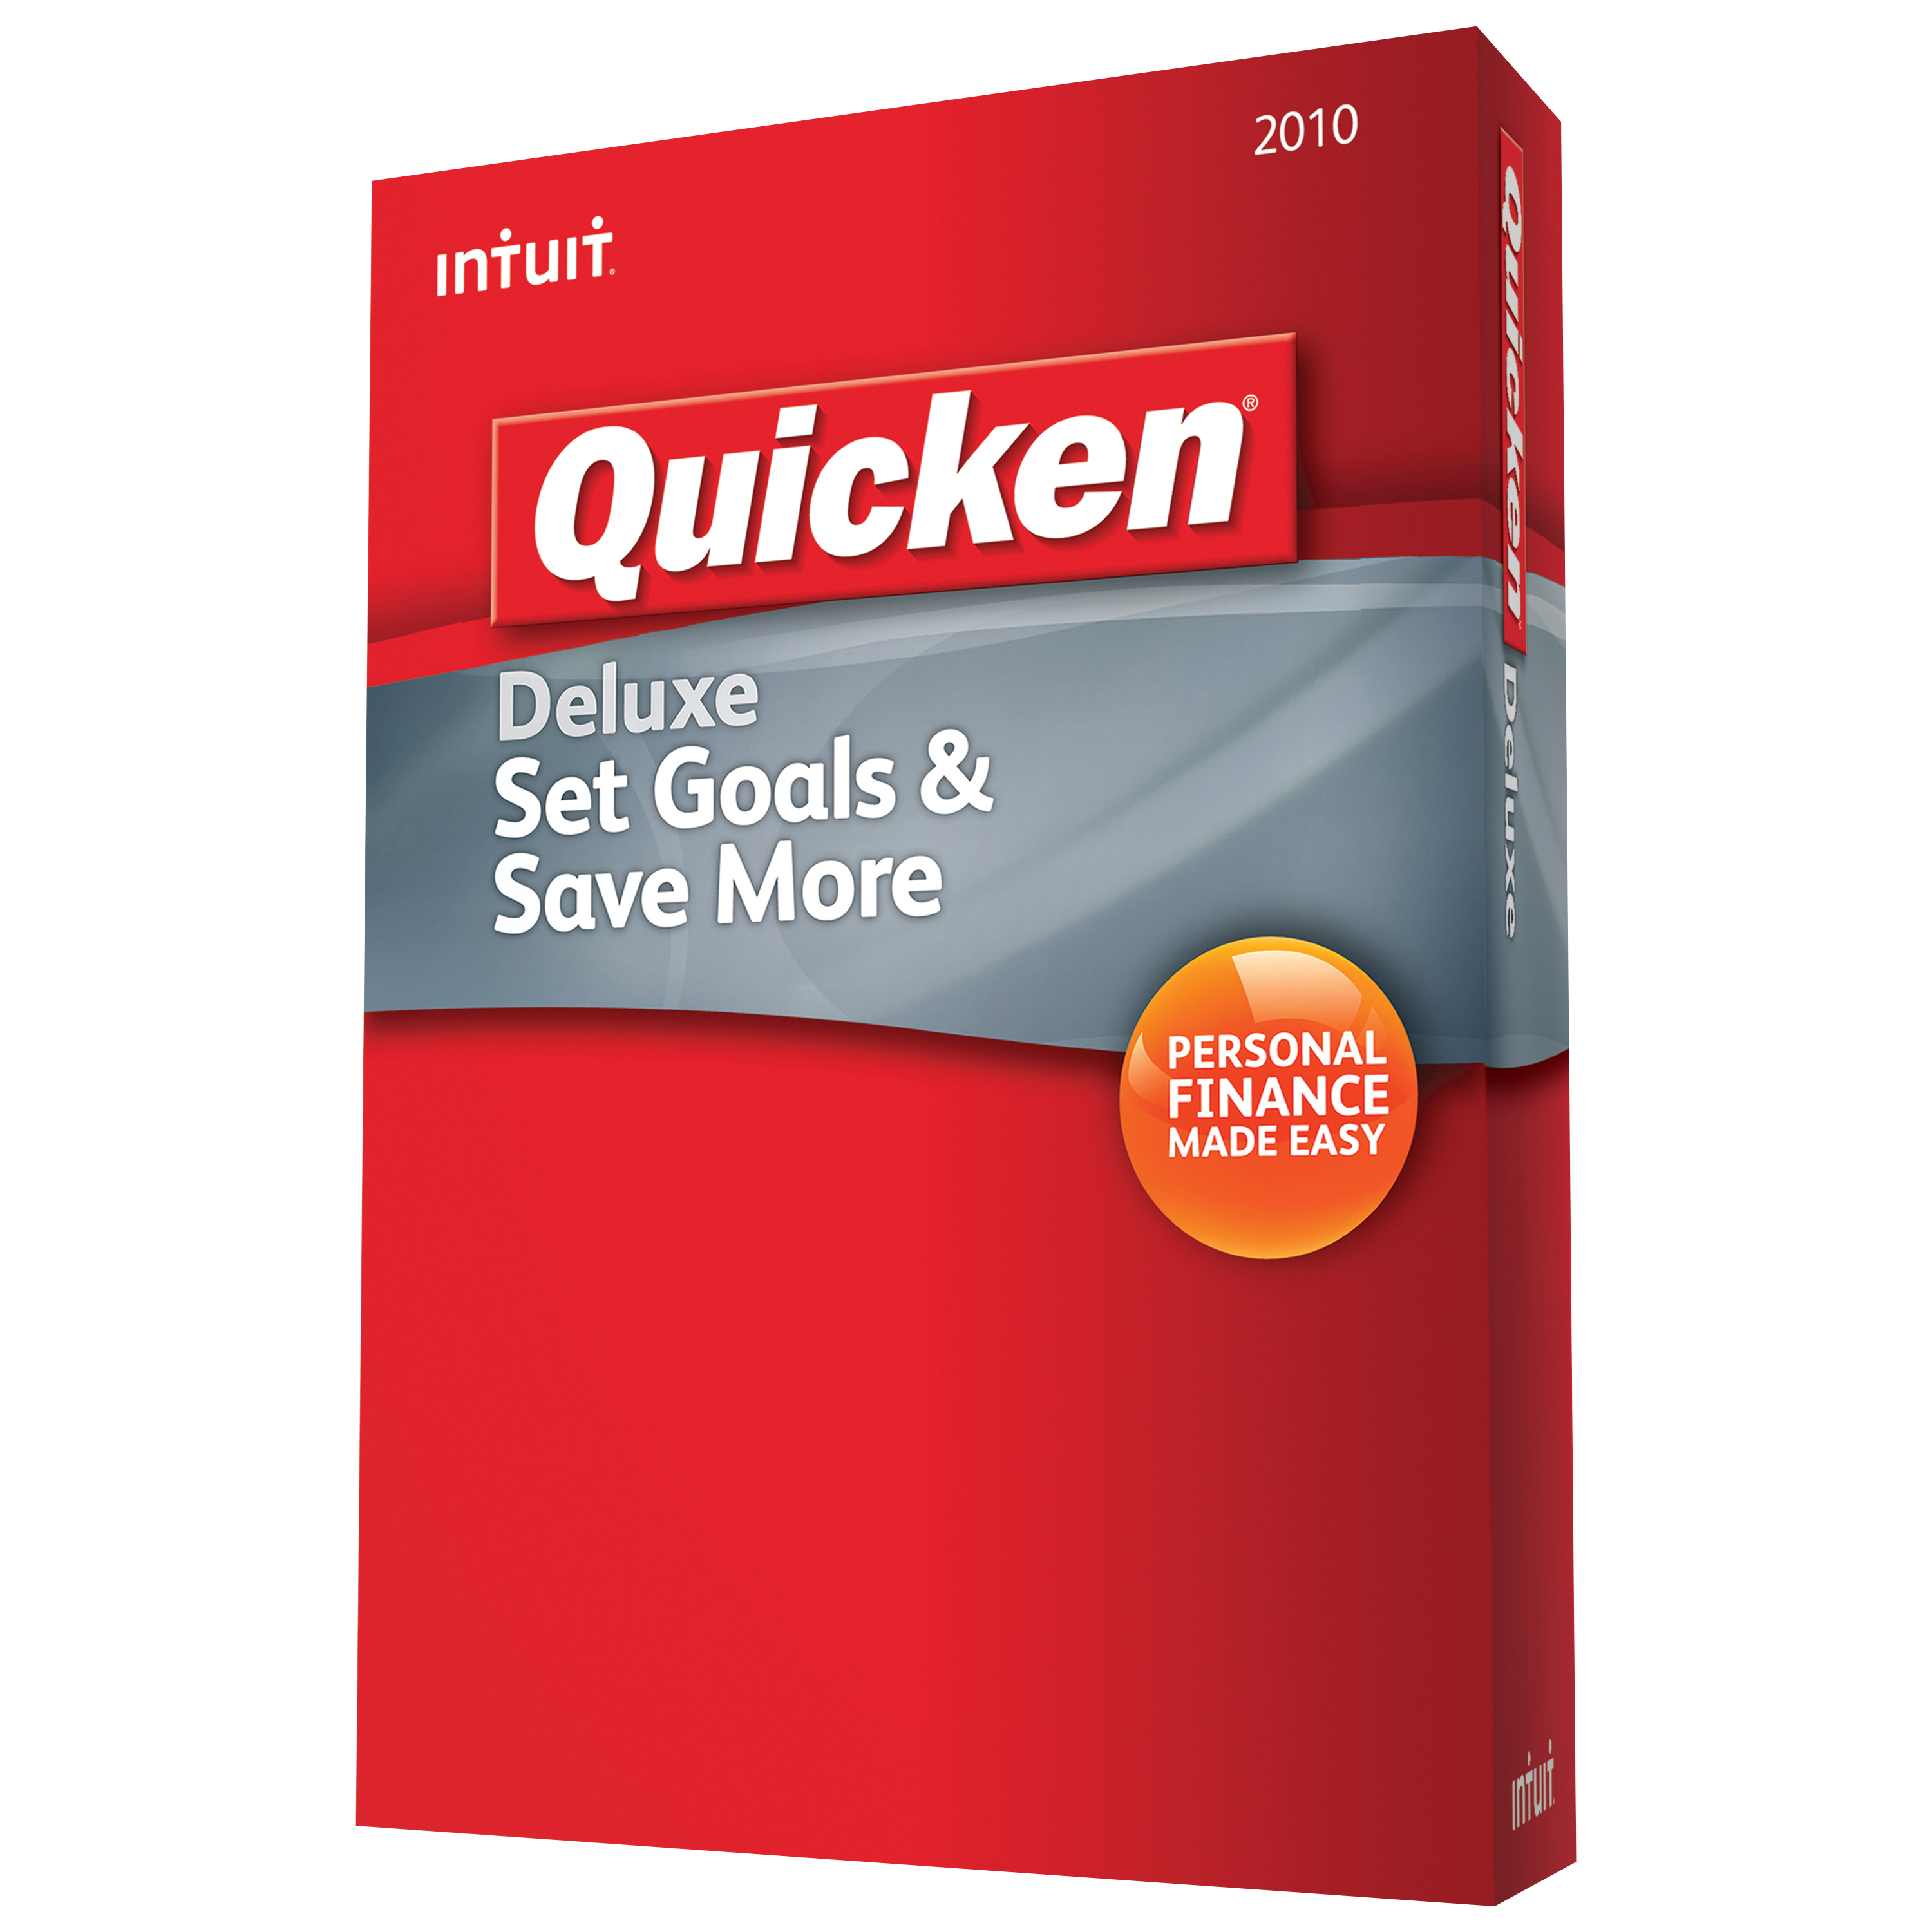 quicken 2017 home and business